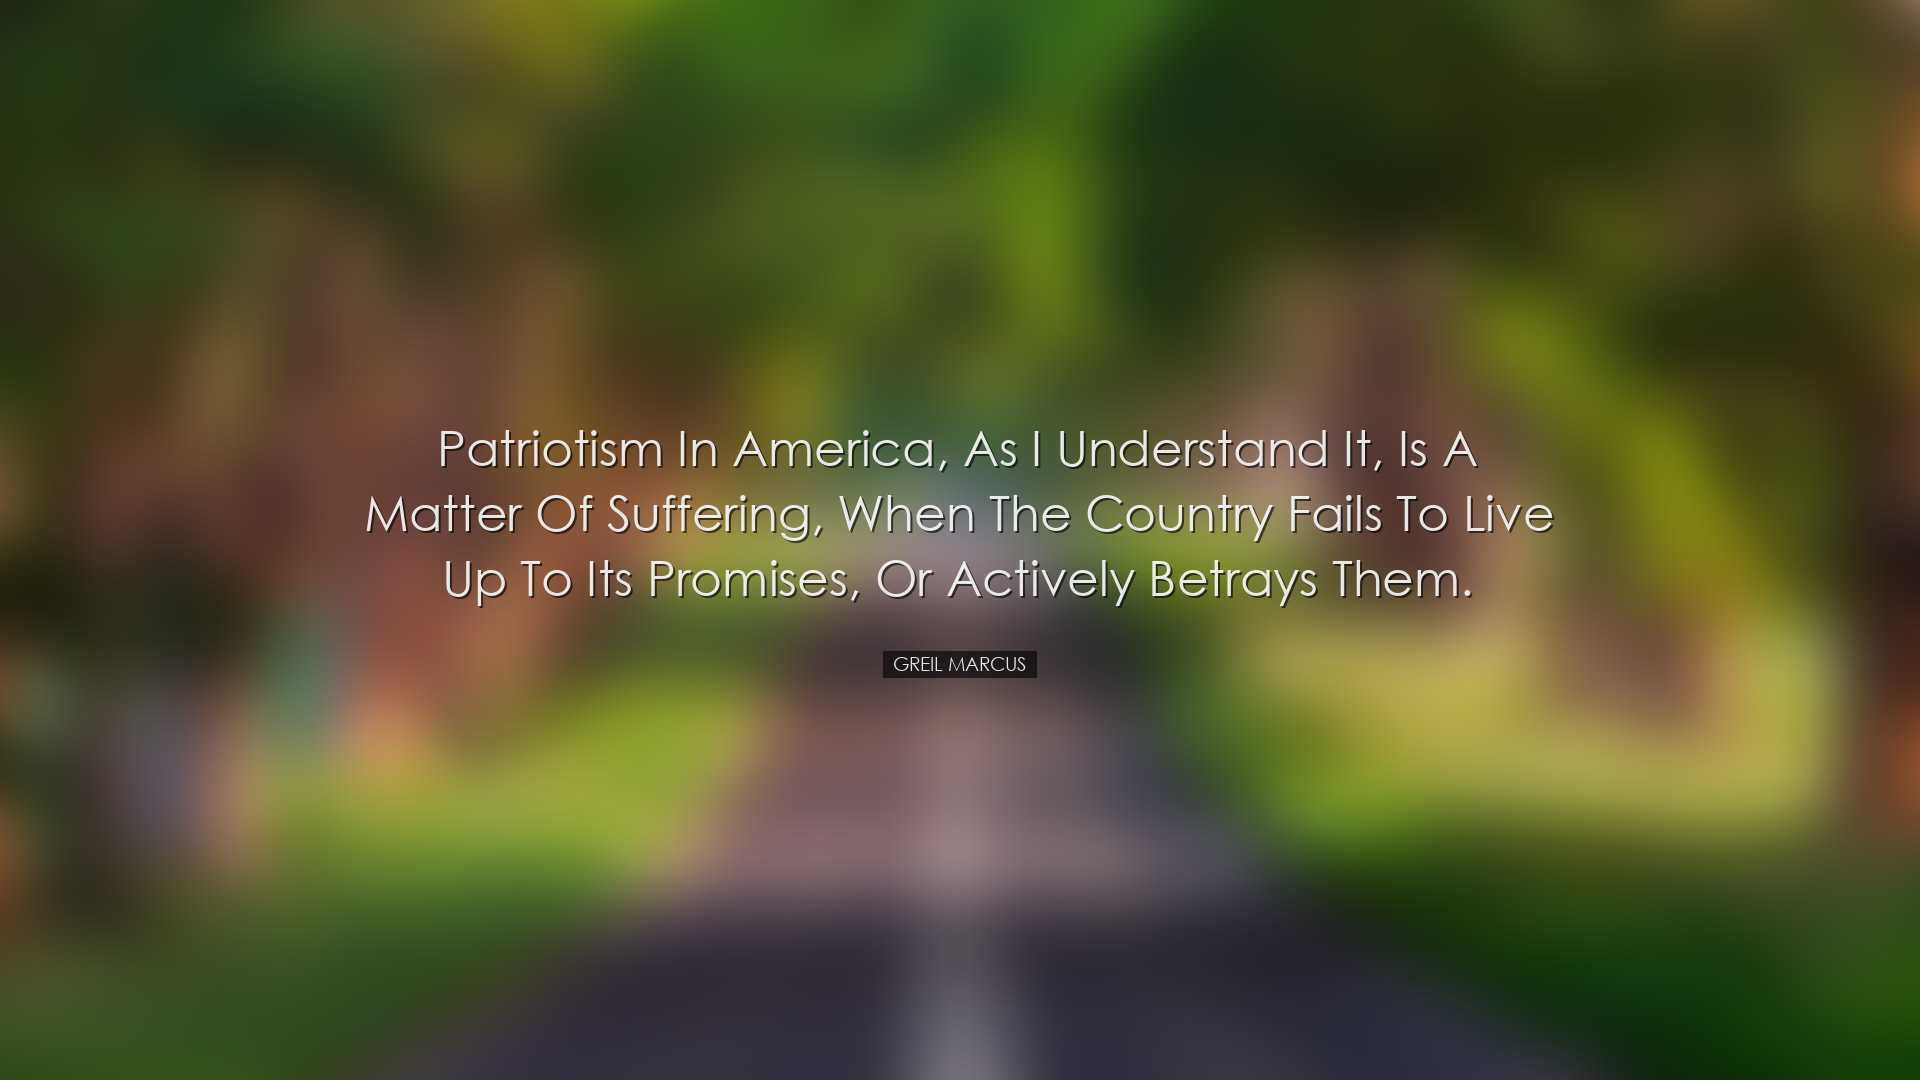 Patriotism in America, as I understand it, is a matter of sufferin